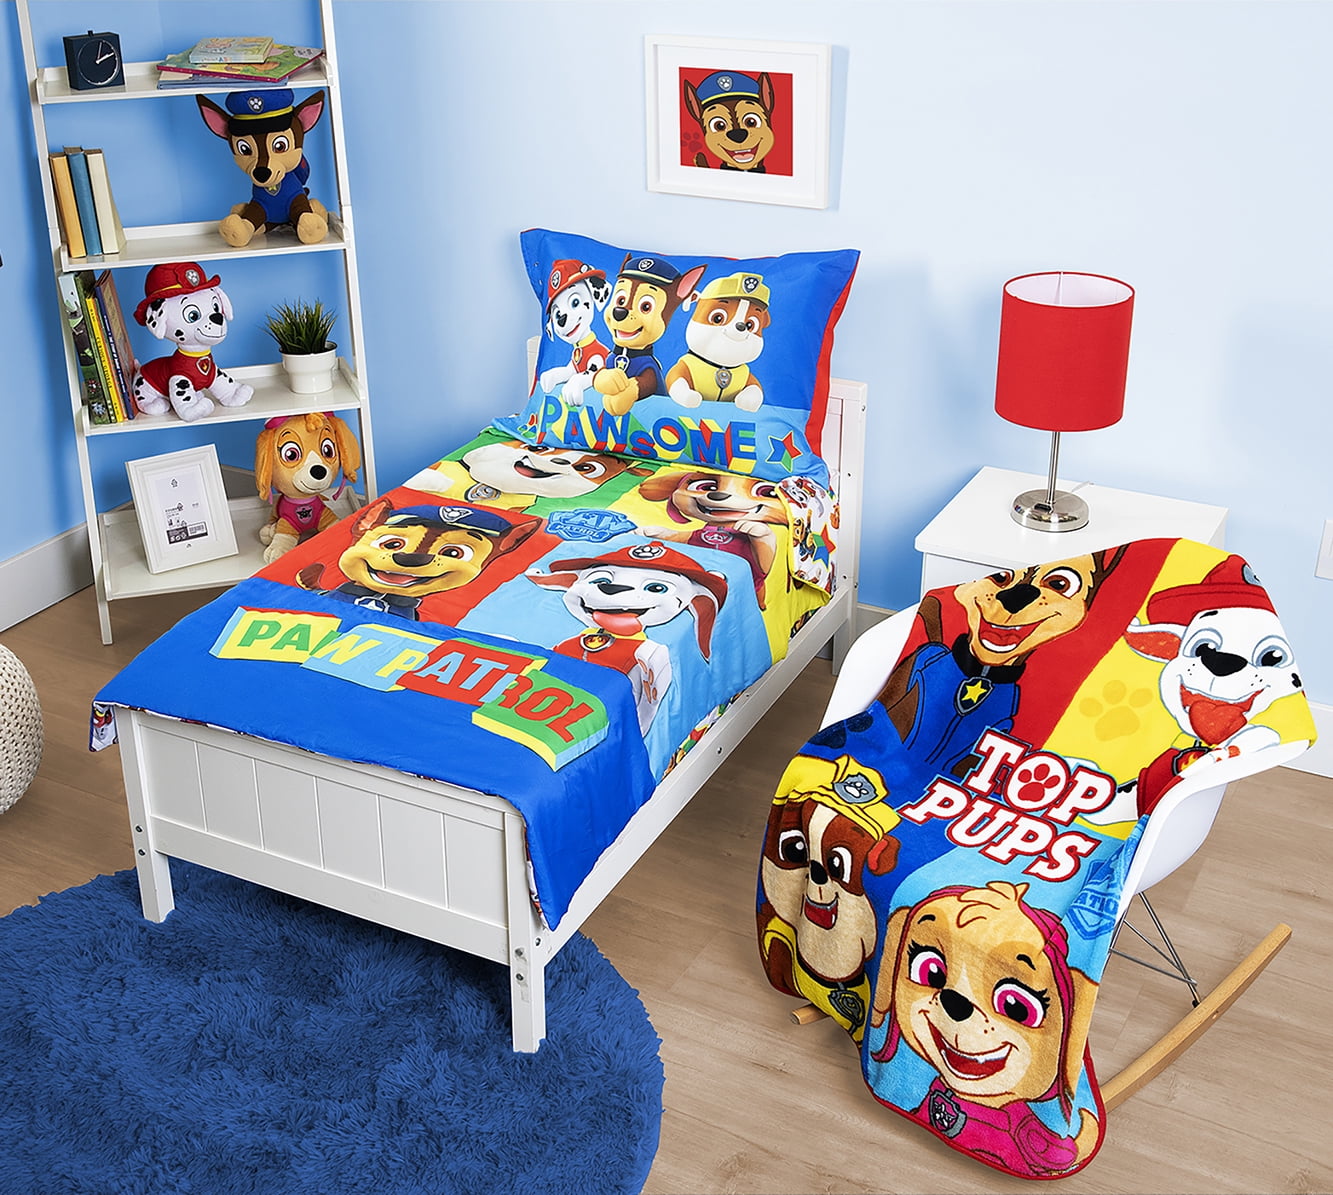 Paw Patrol Fitted Toddler Sheet and Pillow Case Set, Red